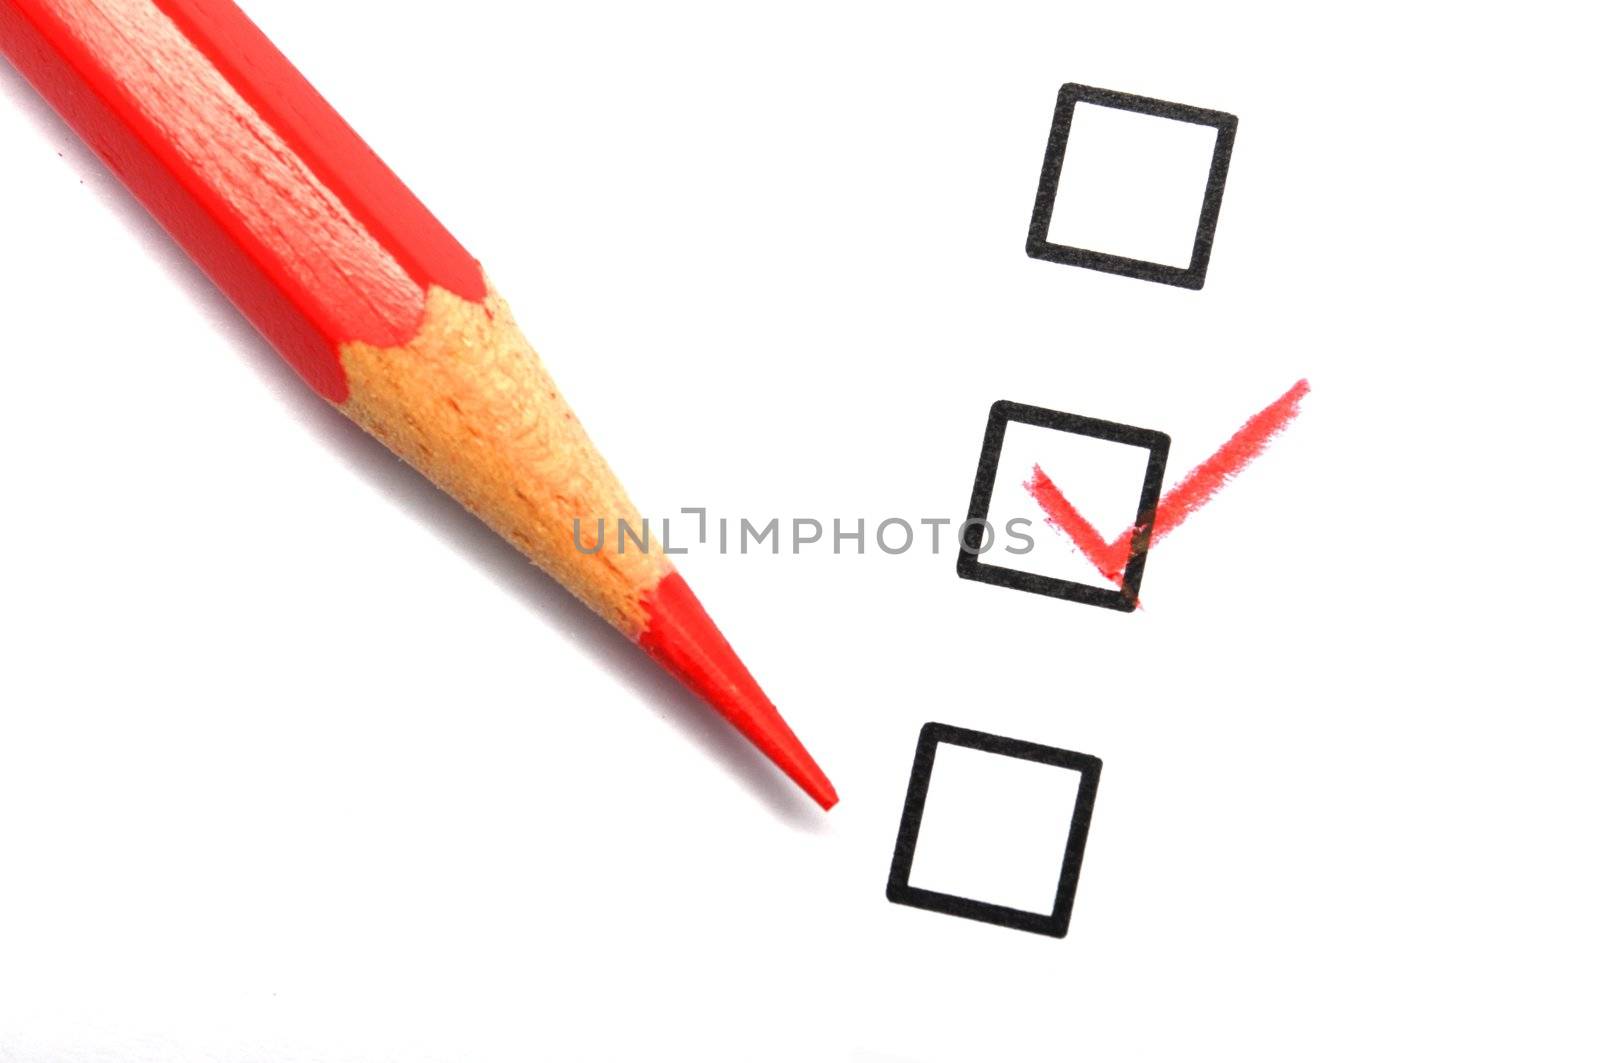 checkbox and pencil showing science education research or customer satisfaction survey concept